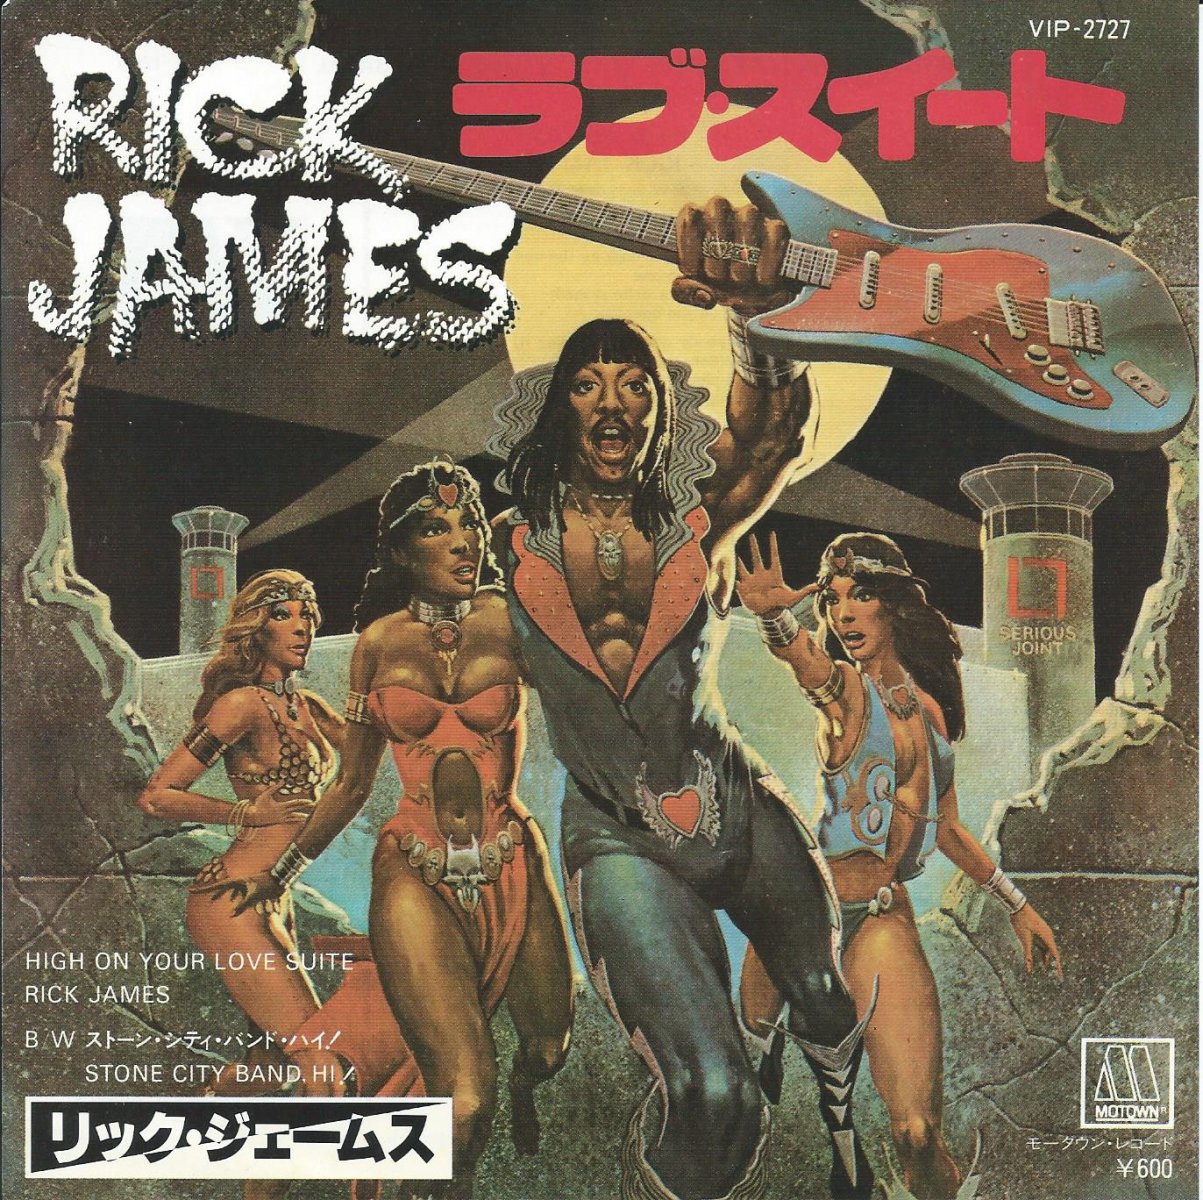 åॹ RICK JAMES / ֡ HIGH ON YOUR LOVE SUITE (7